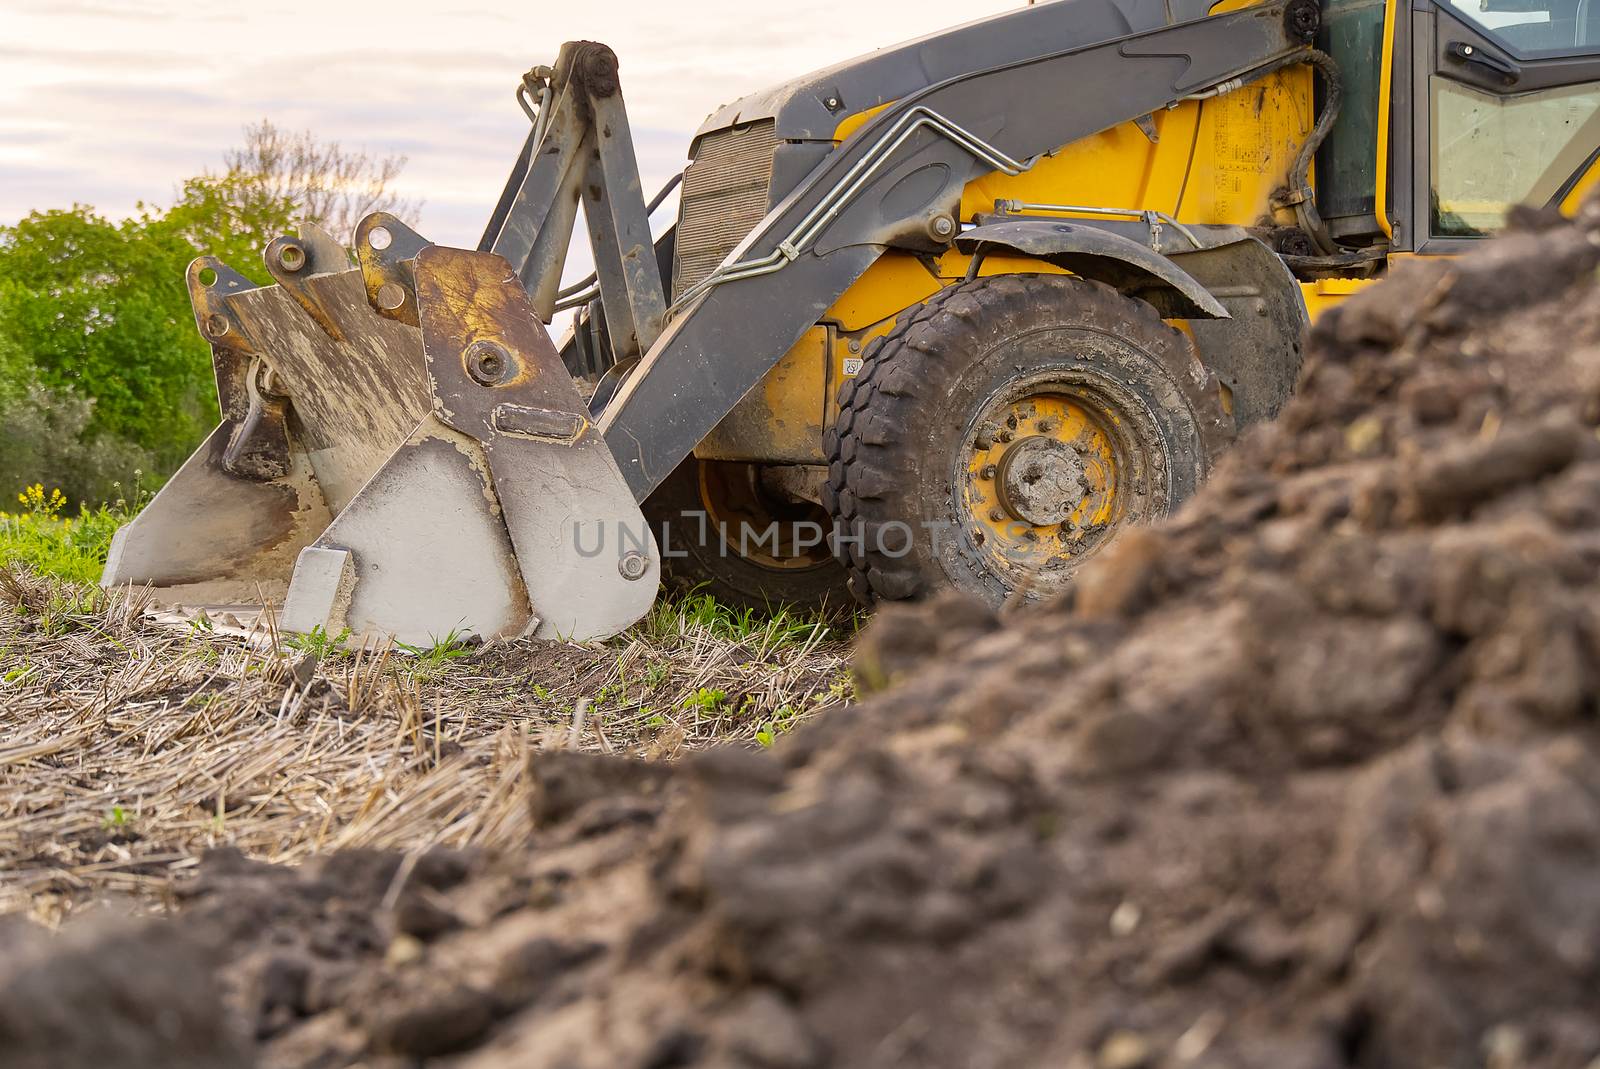 Yellow Excavator. yellow tractor on the field. Construction Machinery On Field. large yellow wheel loader aligns a piece of land for a new building. Tractor On Farmland